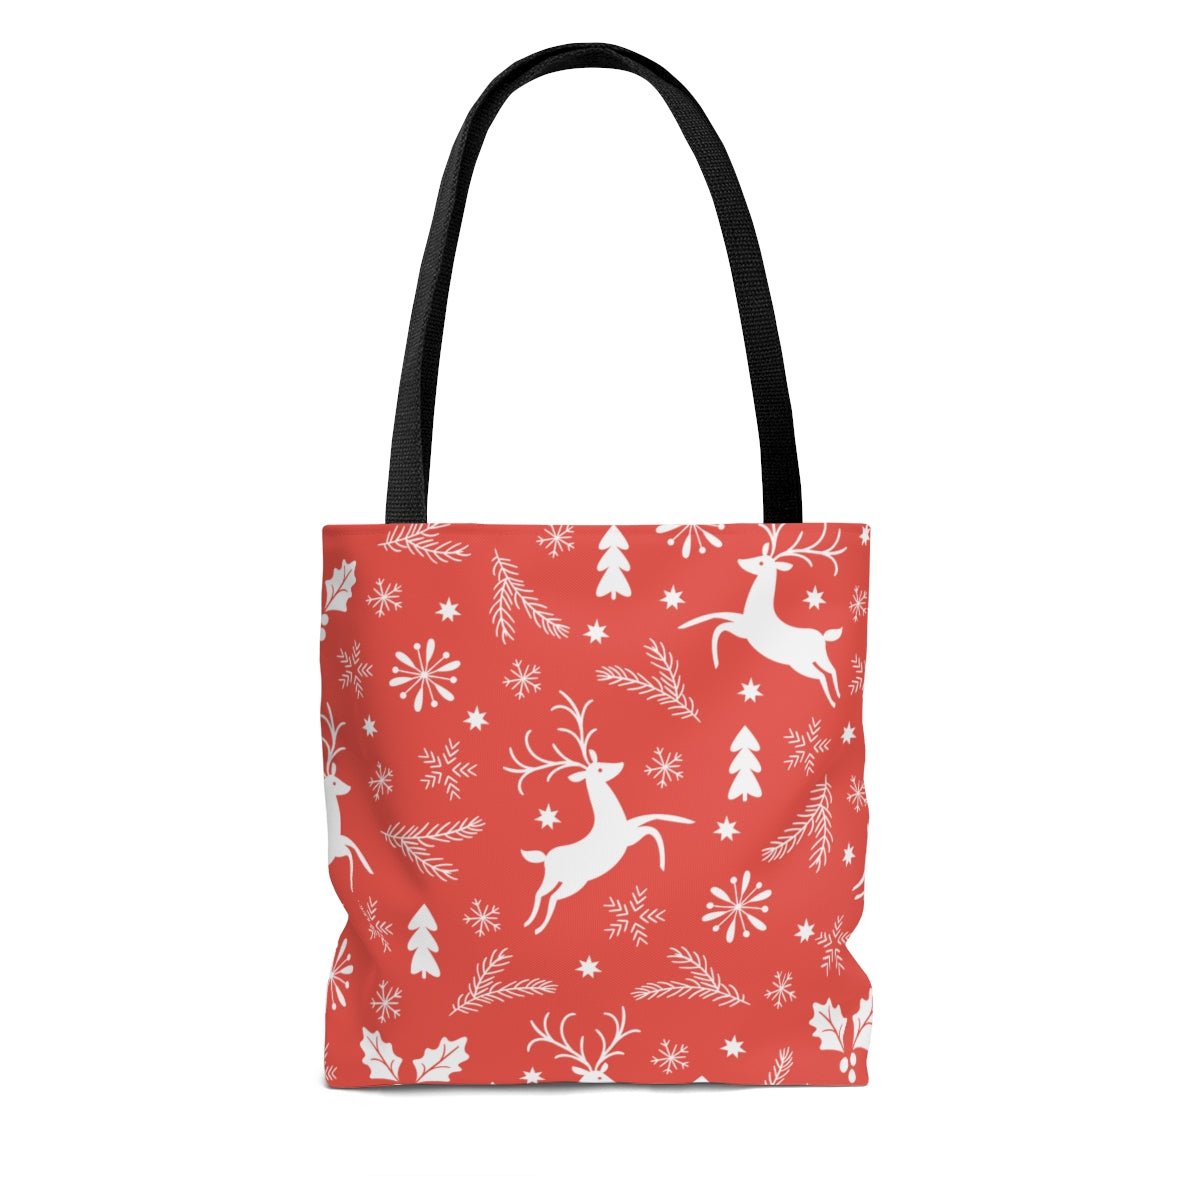 Christmas Reindeers Tote Bag - Puffin Lime